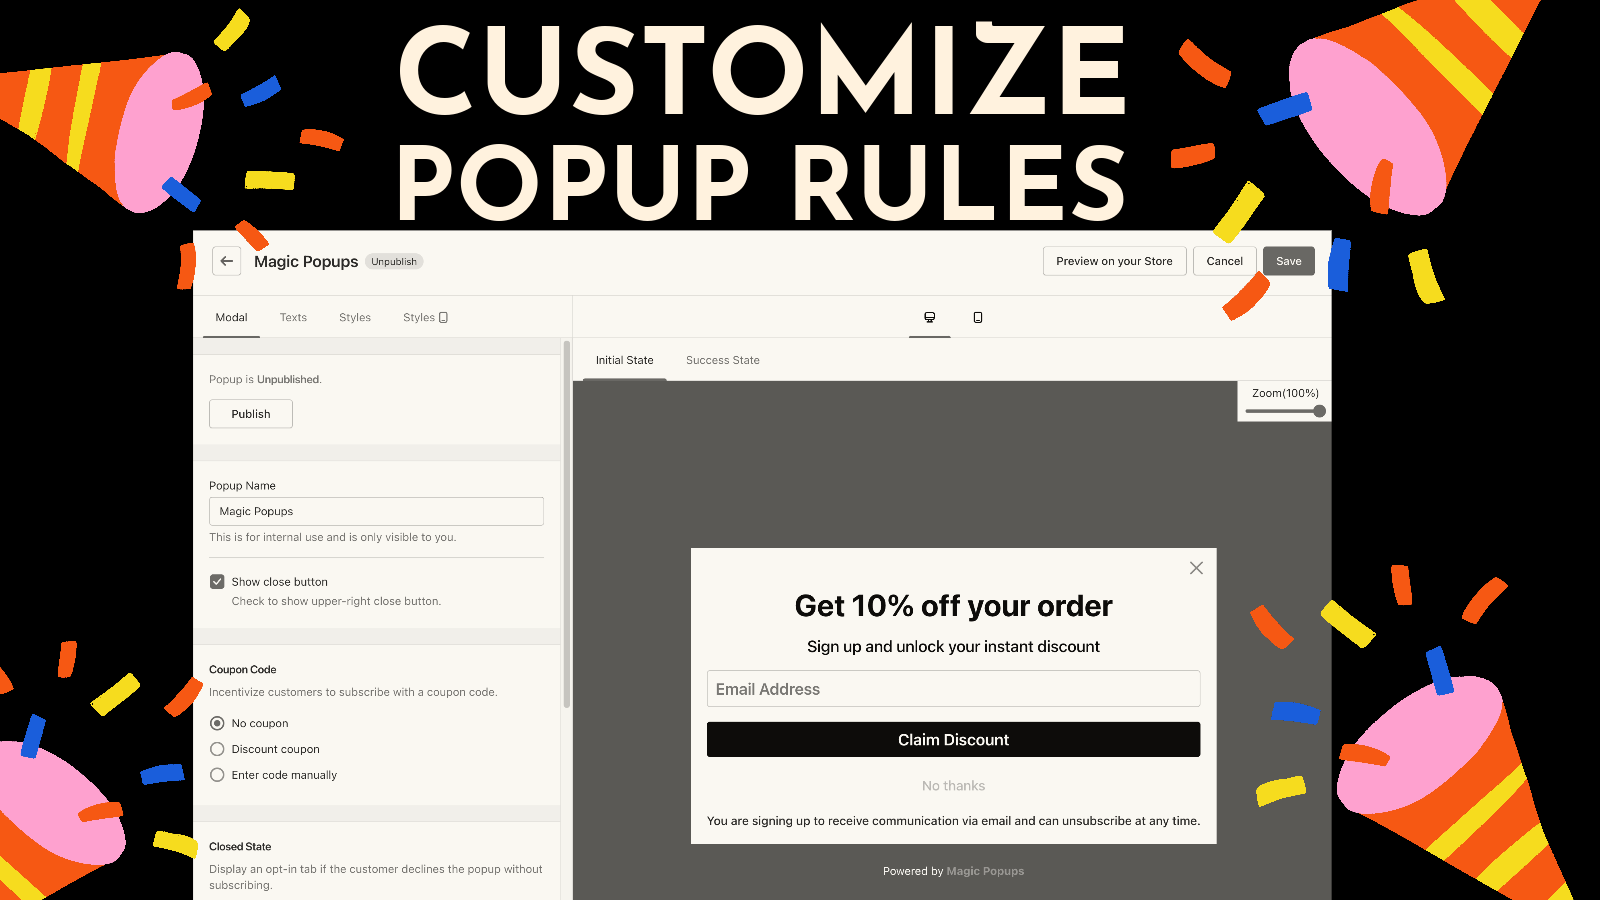 Customize popup rules